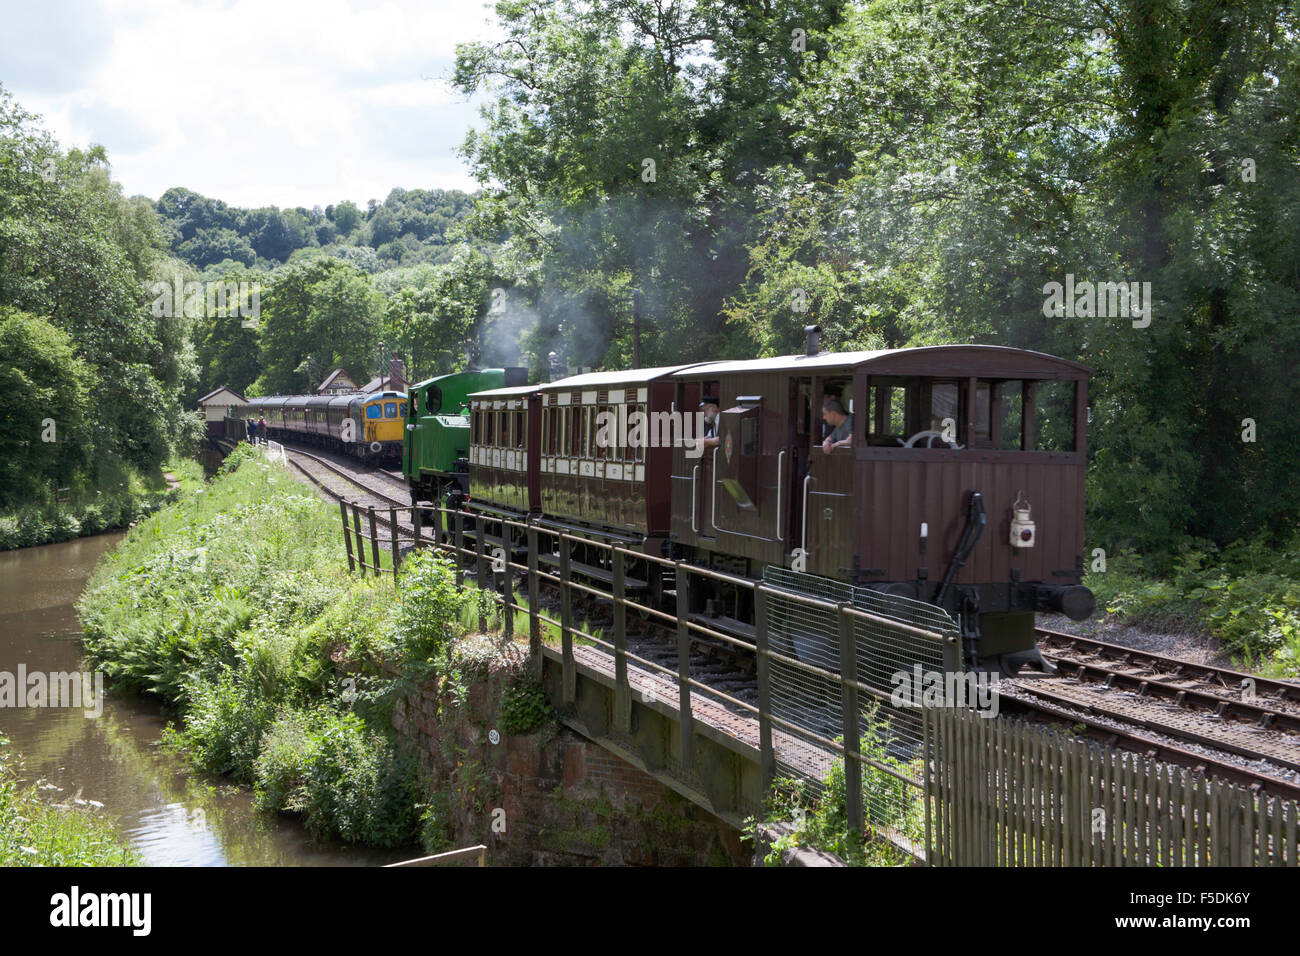 Vintage train hauled by a steam locomotive at Consall Station on The Churnet Valley Railway Staffordshire England Stock Photo